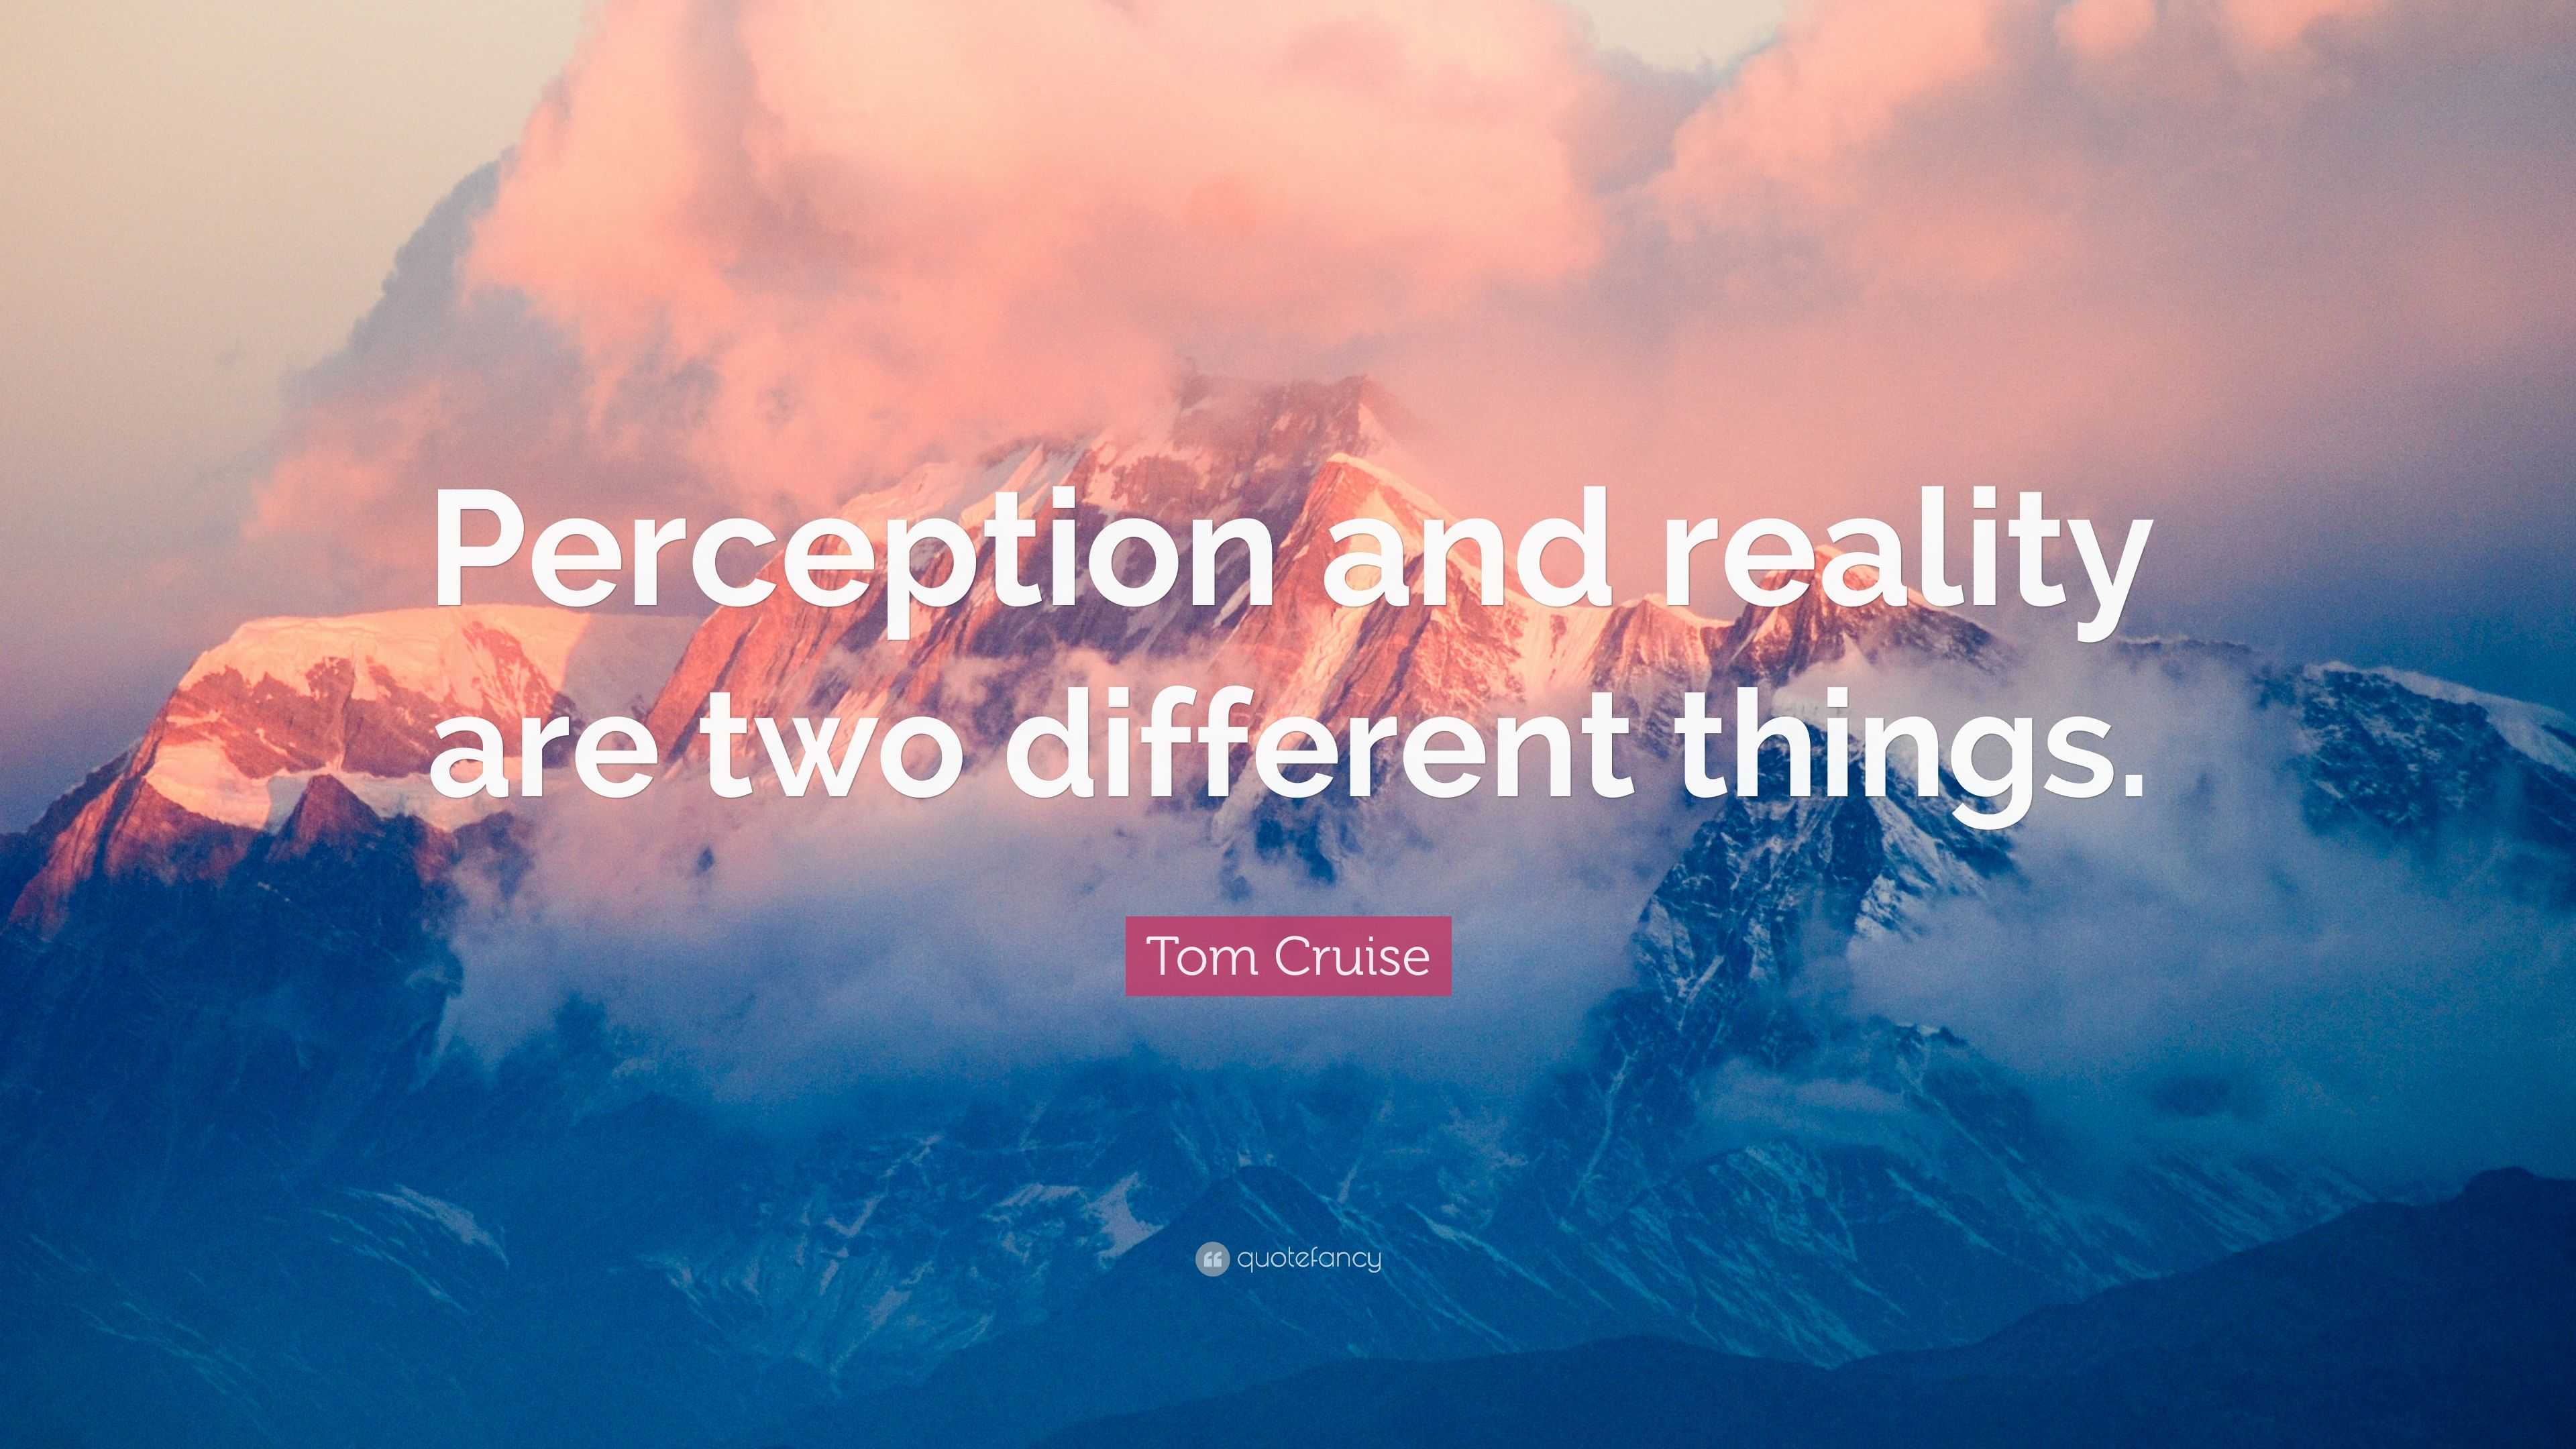 Tom Cruise Quote: “Perception and reality are two different things.”